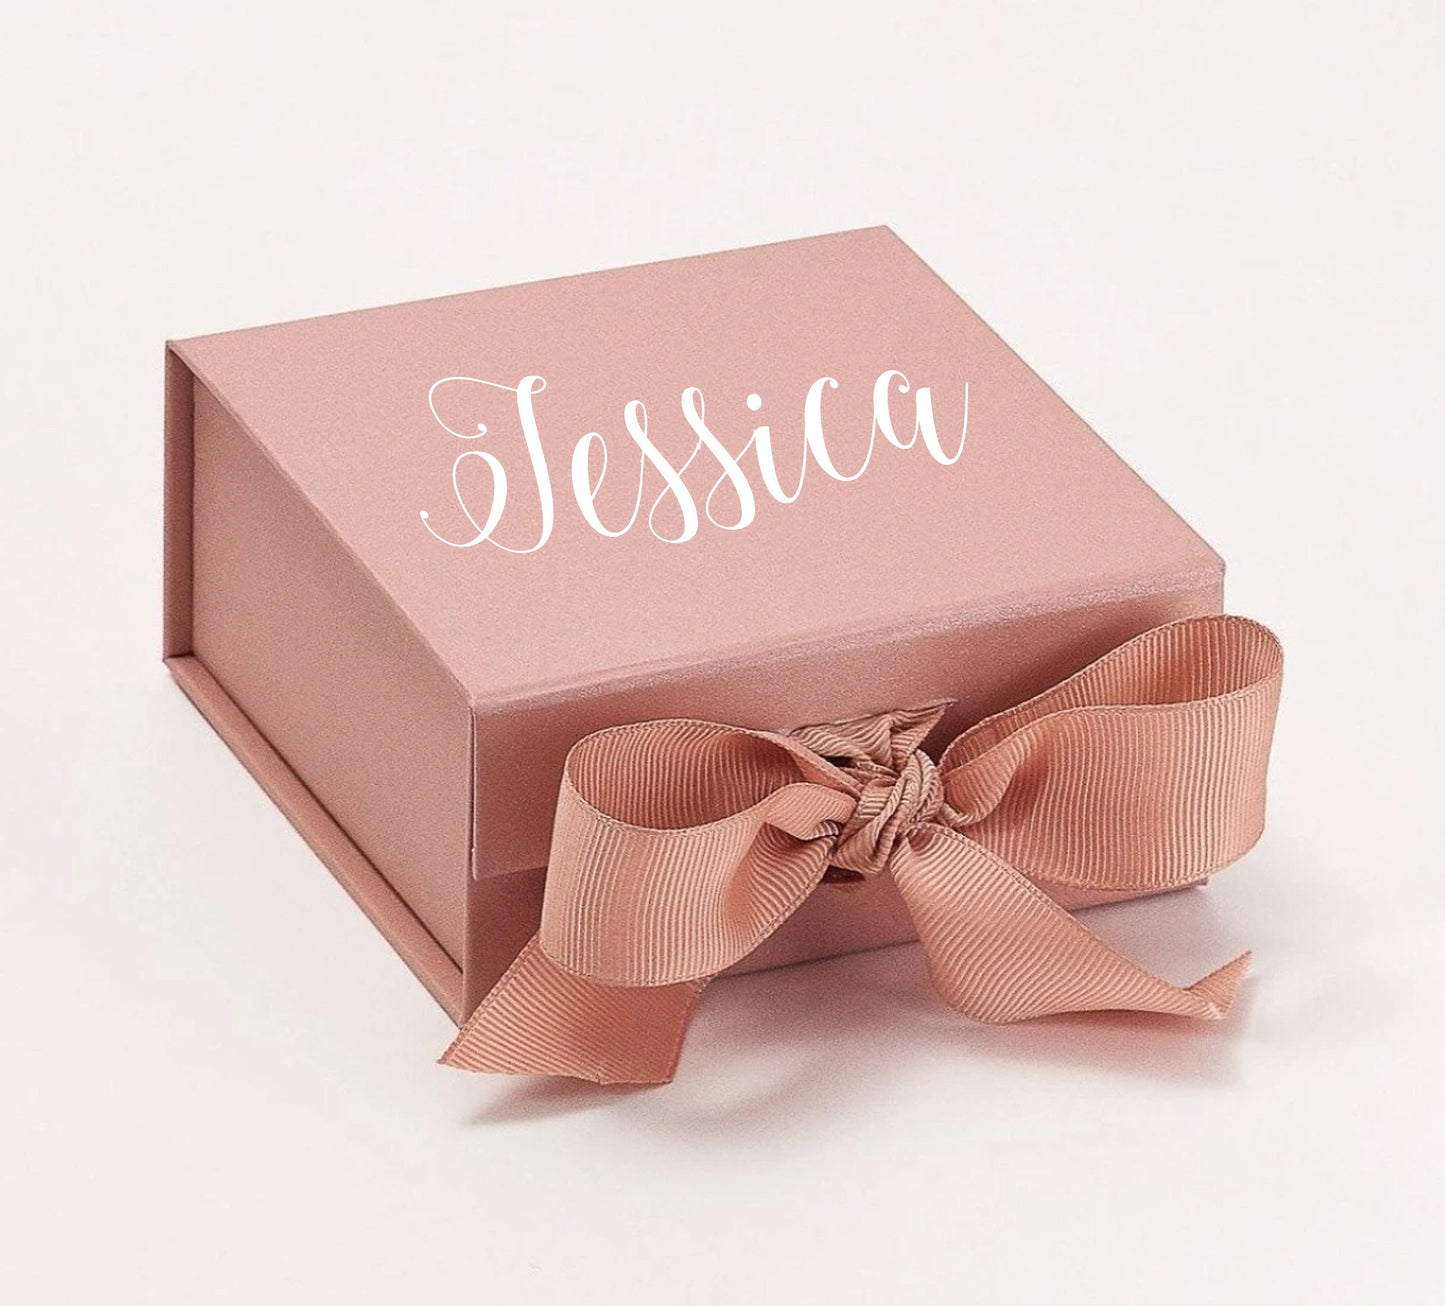 Personalised pink gift box with white printed name wedding box bridesmaid birthday with ribbon new baby